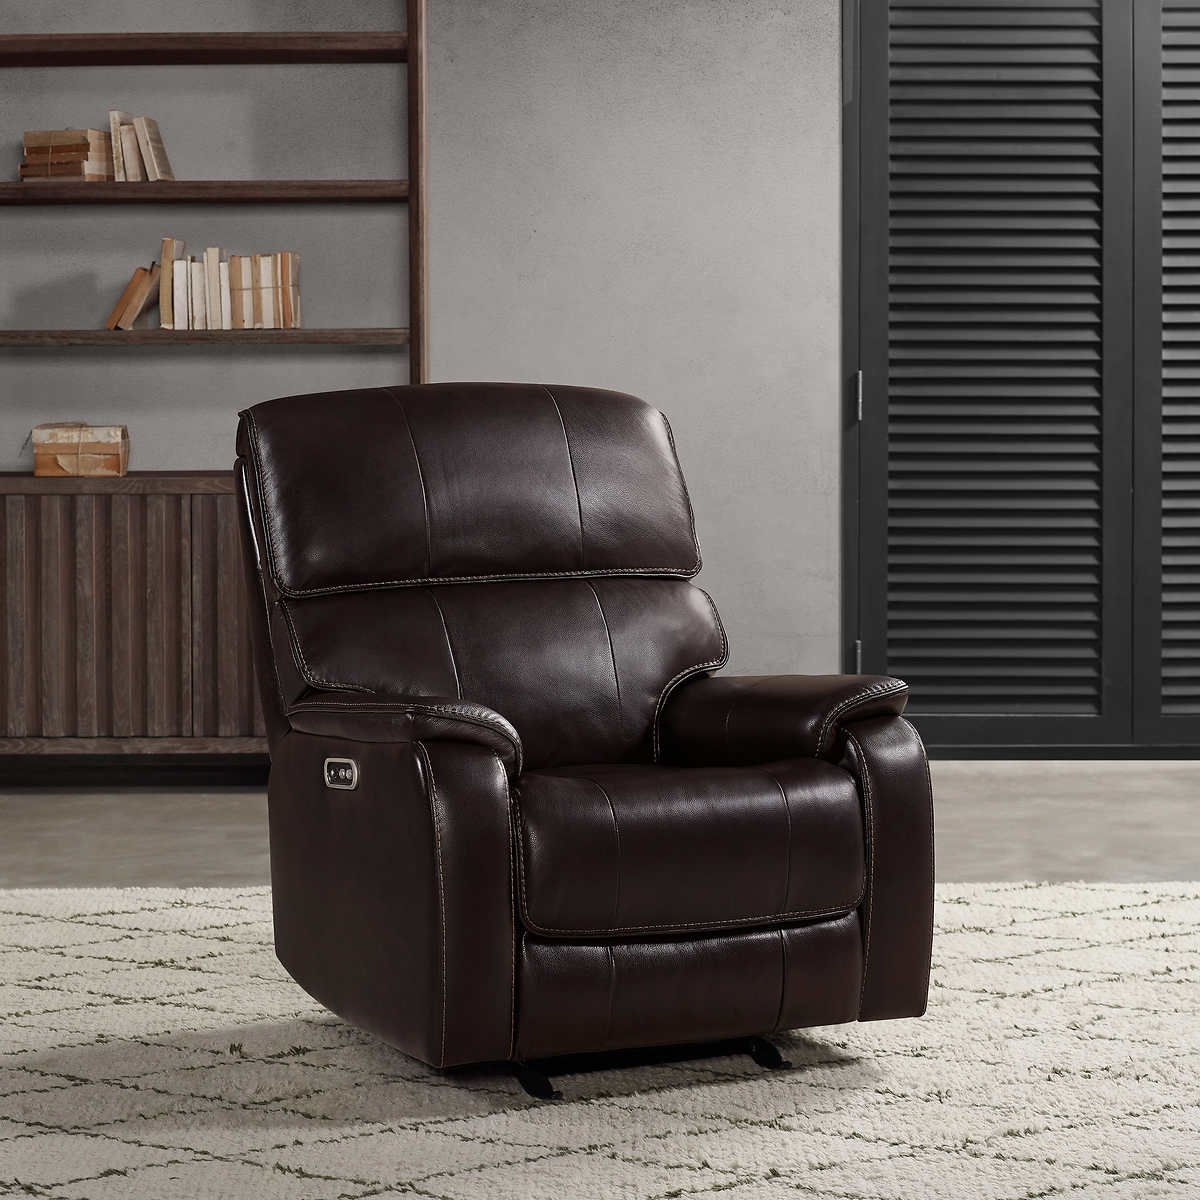 Barcalounger Columbia Leather Power, Barcalounger Leather Recliner Reviews